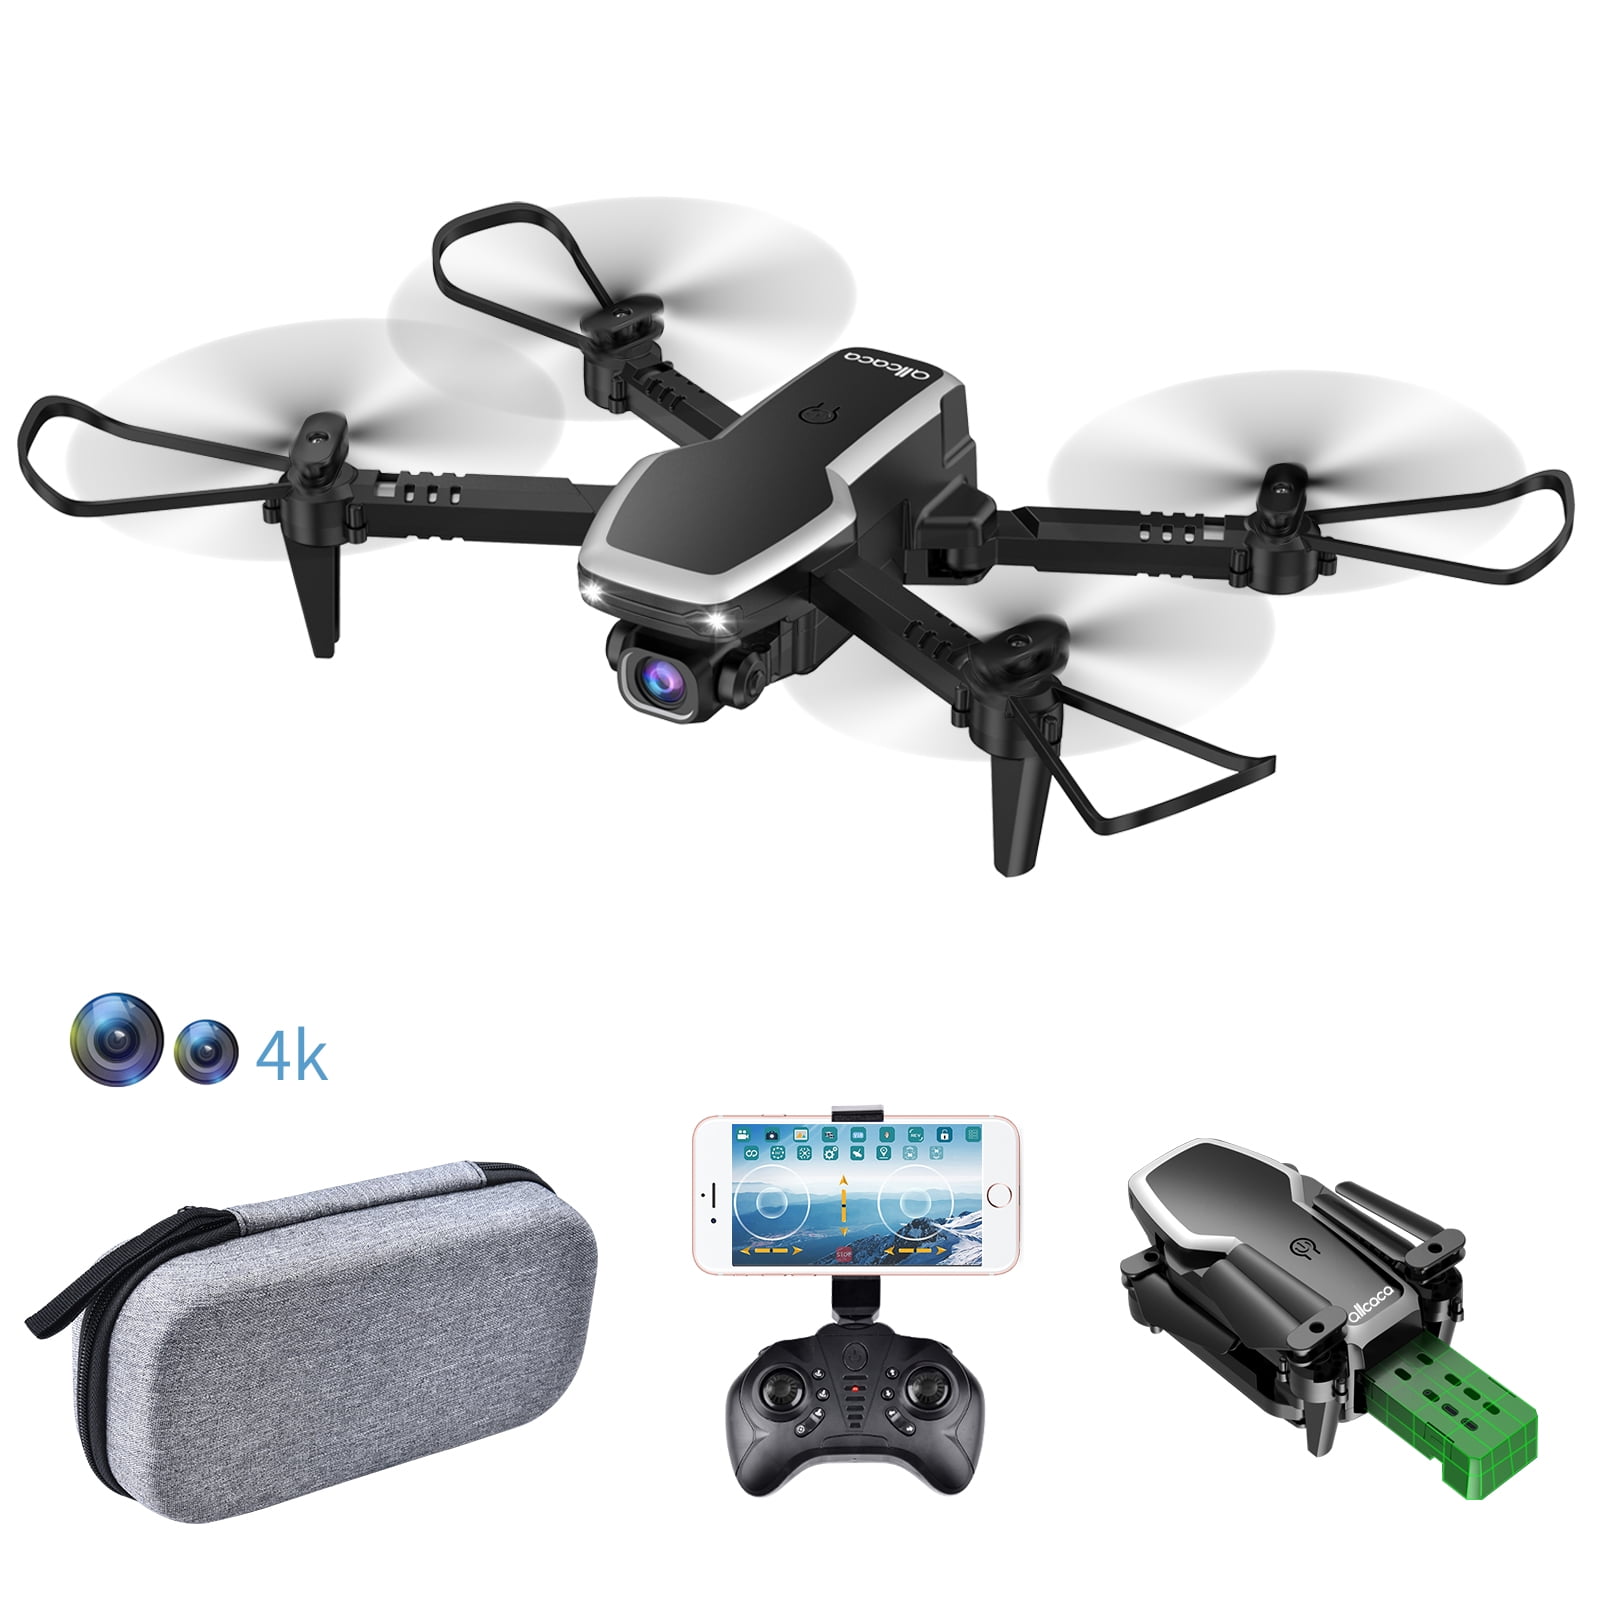 NEW 14" MIDDLE SIZE OUTDOOR INDOOR AUTOMATIC FLYING DRONE REMOTE CONTROL TOY 